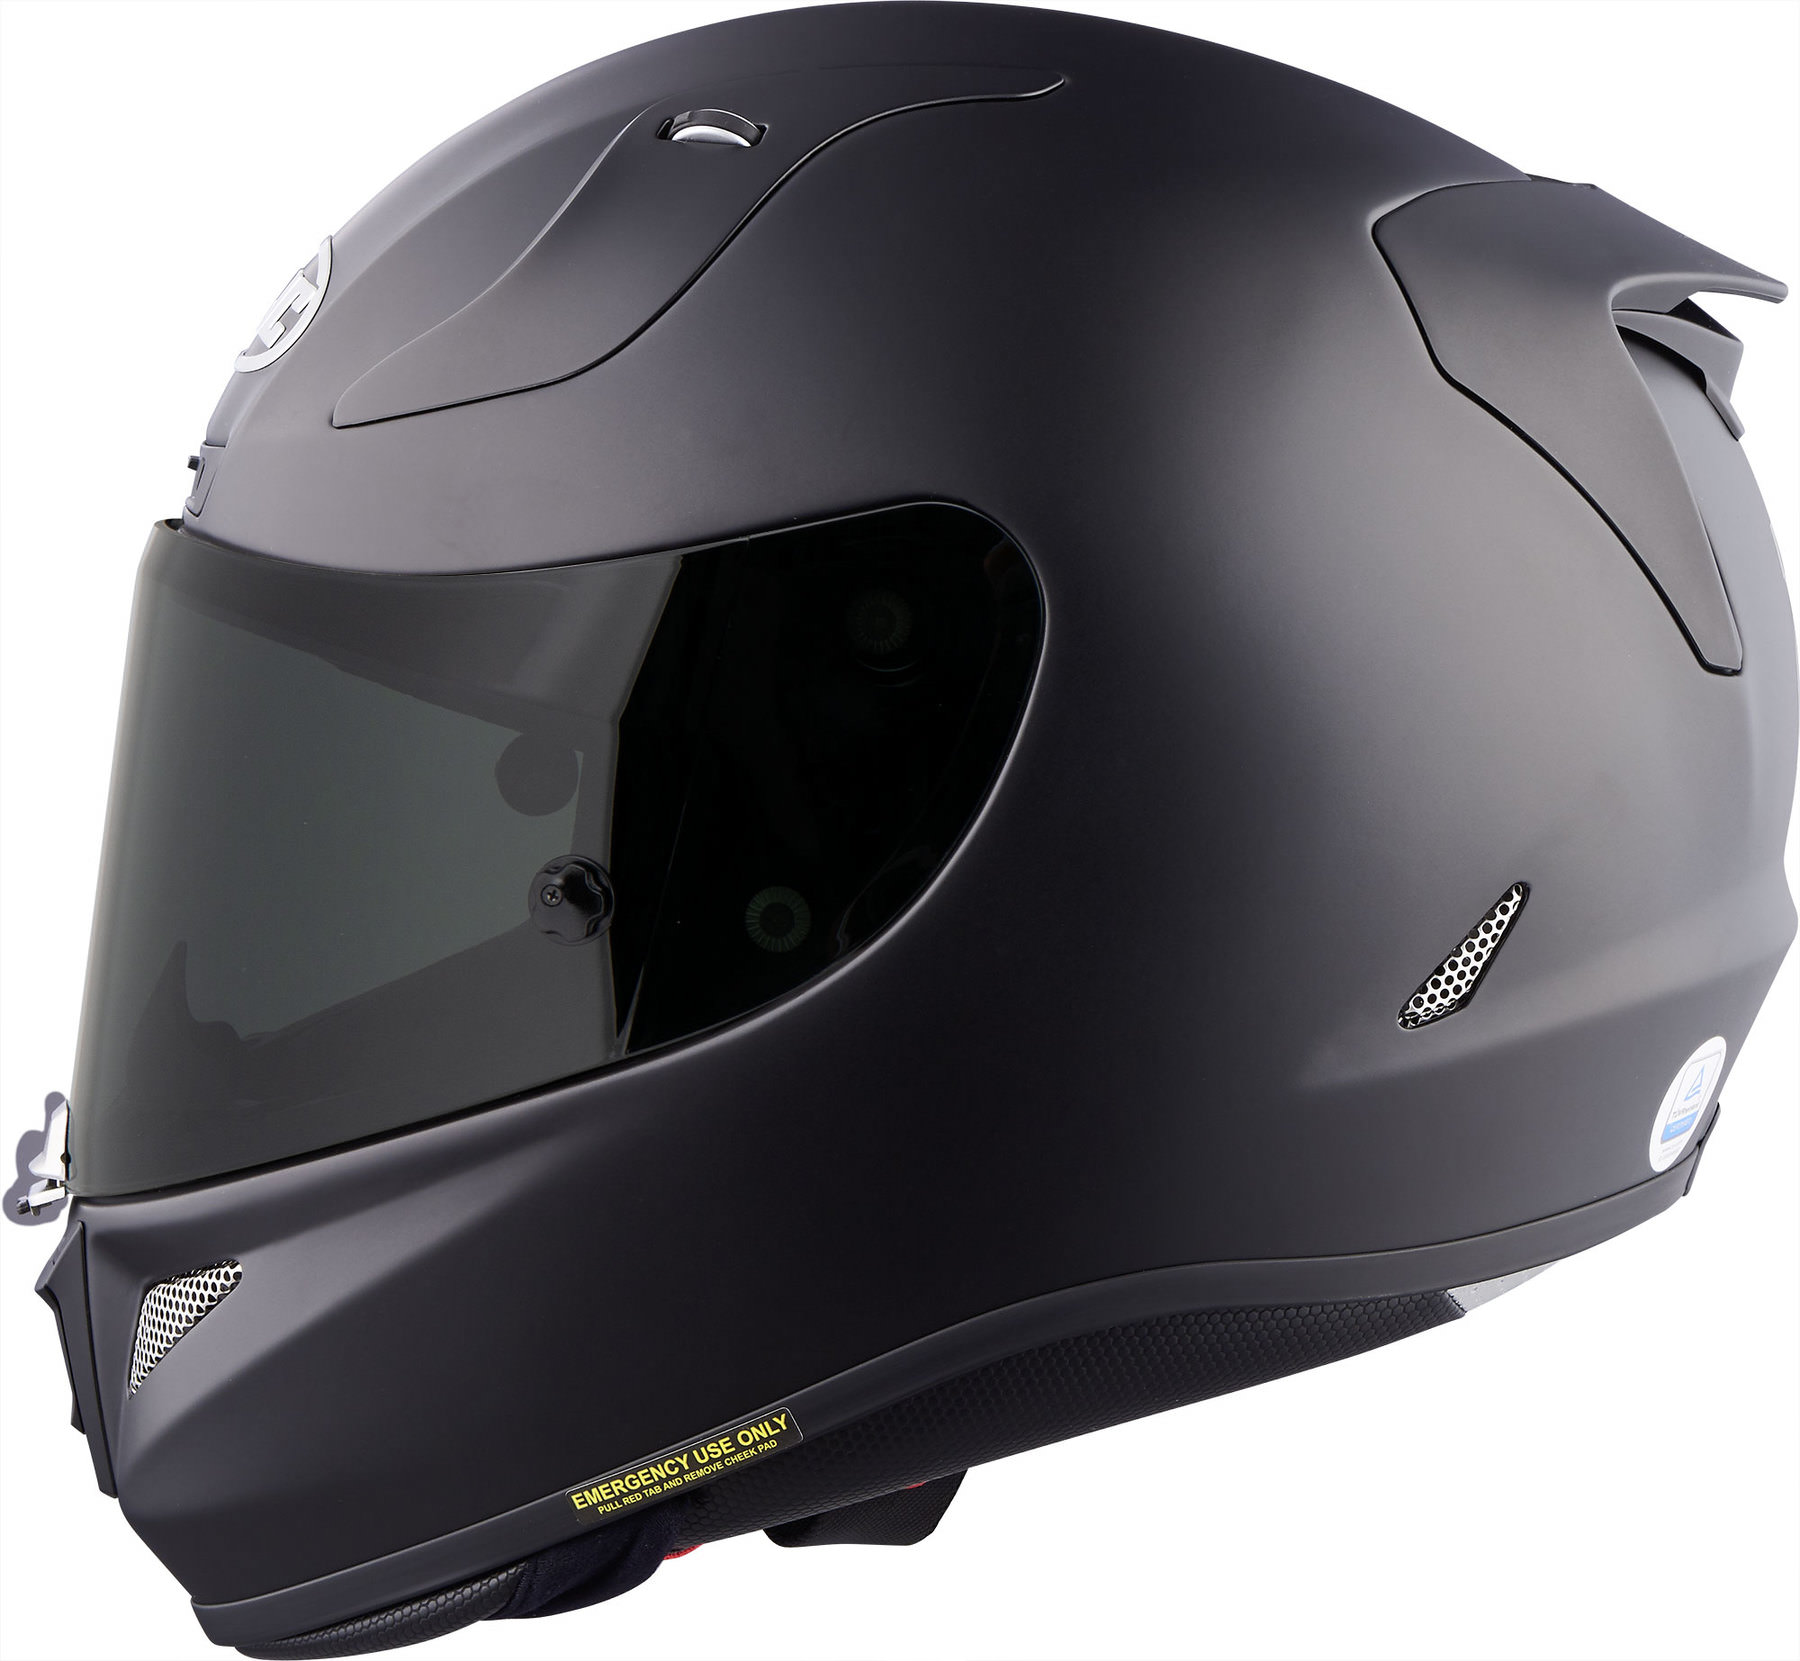 Buy HJC RPHA 11 Full-Face Helmet | Louis motorcycle clothing and technology